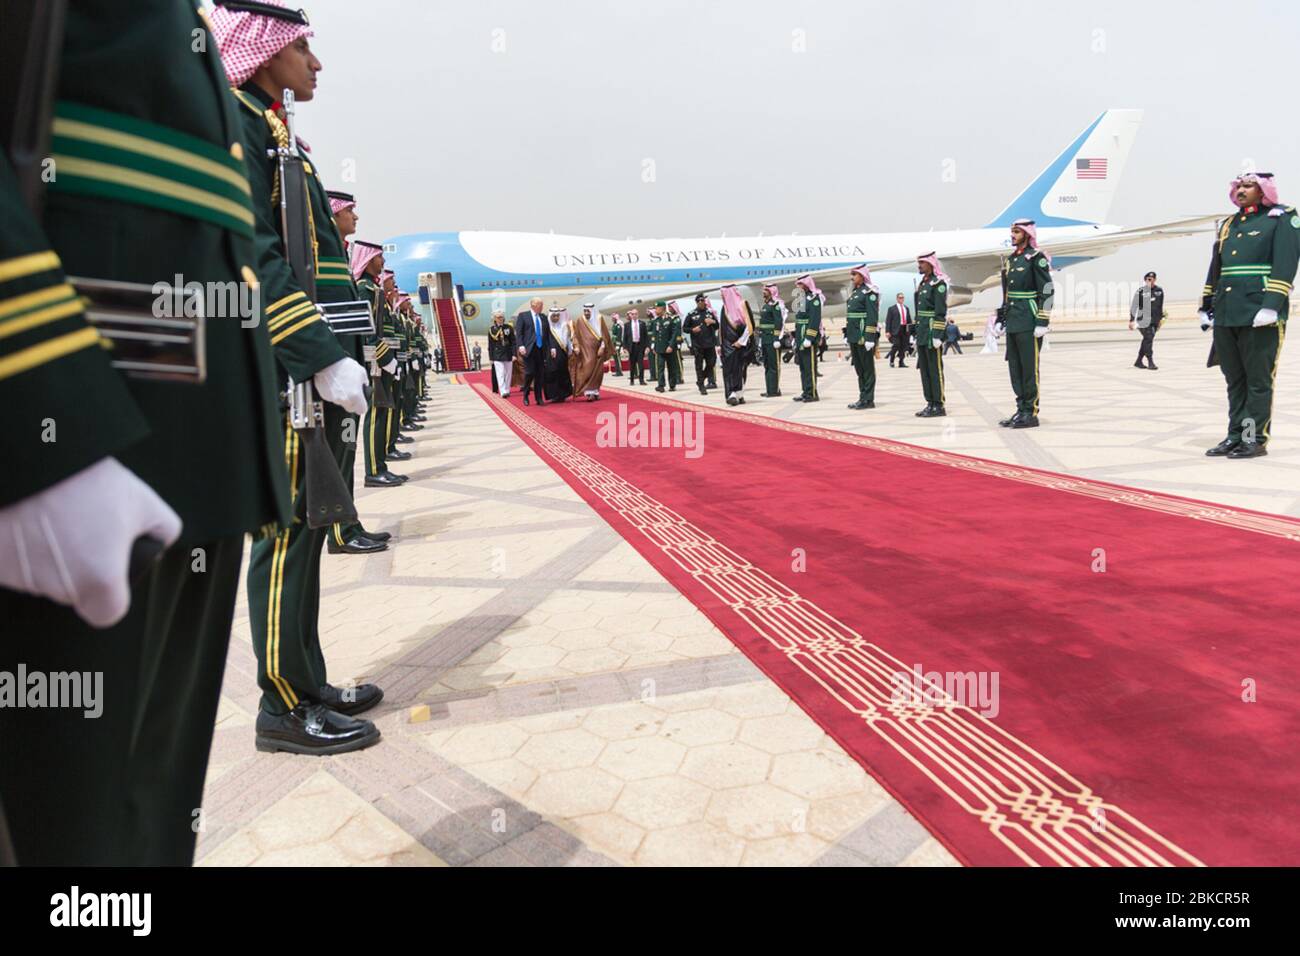 President Donald Trump and First Lady Melania Trump receive a red carpet welcome by King Salman bin Abdulaziz Al Saud of Saudi Arabia and his official delegation, Saturday, May 20, 2017, on their arrival to King Khalid International Airport in Riyadh, Saudi Arabia. President Trump's Trip Abroad Stock Photo